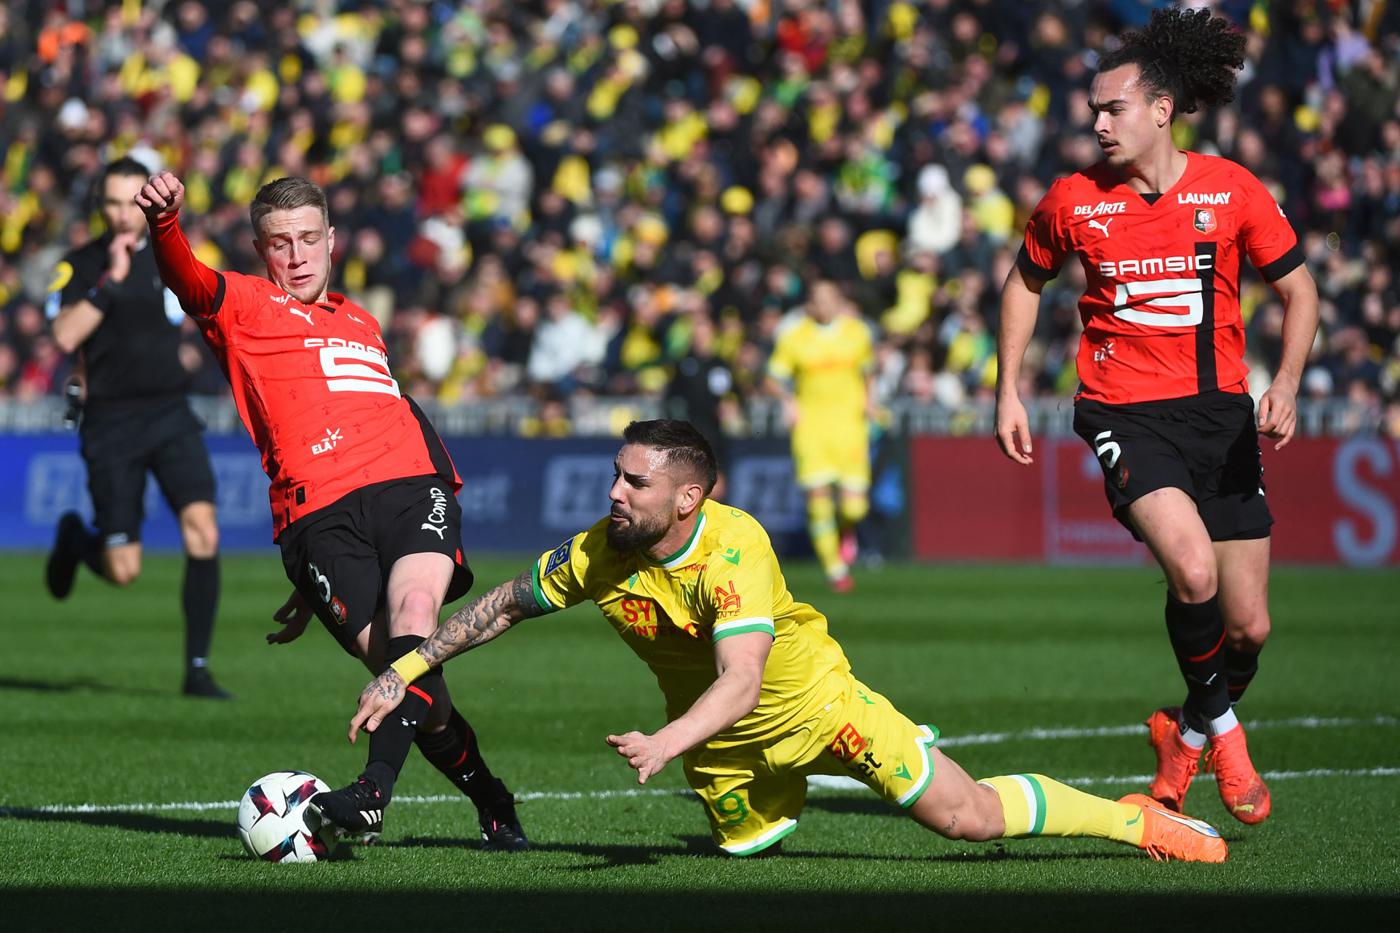 Nantes - Rennes - 0-1. French Championship, 25th round. Match review, statistics.